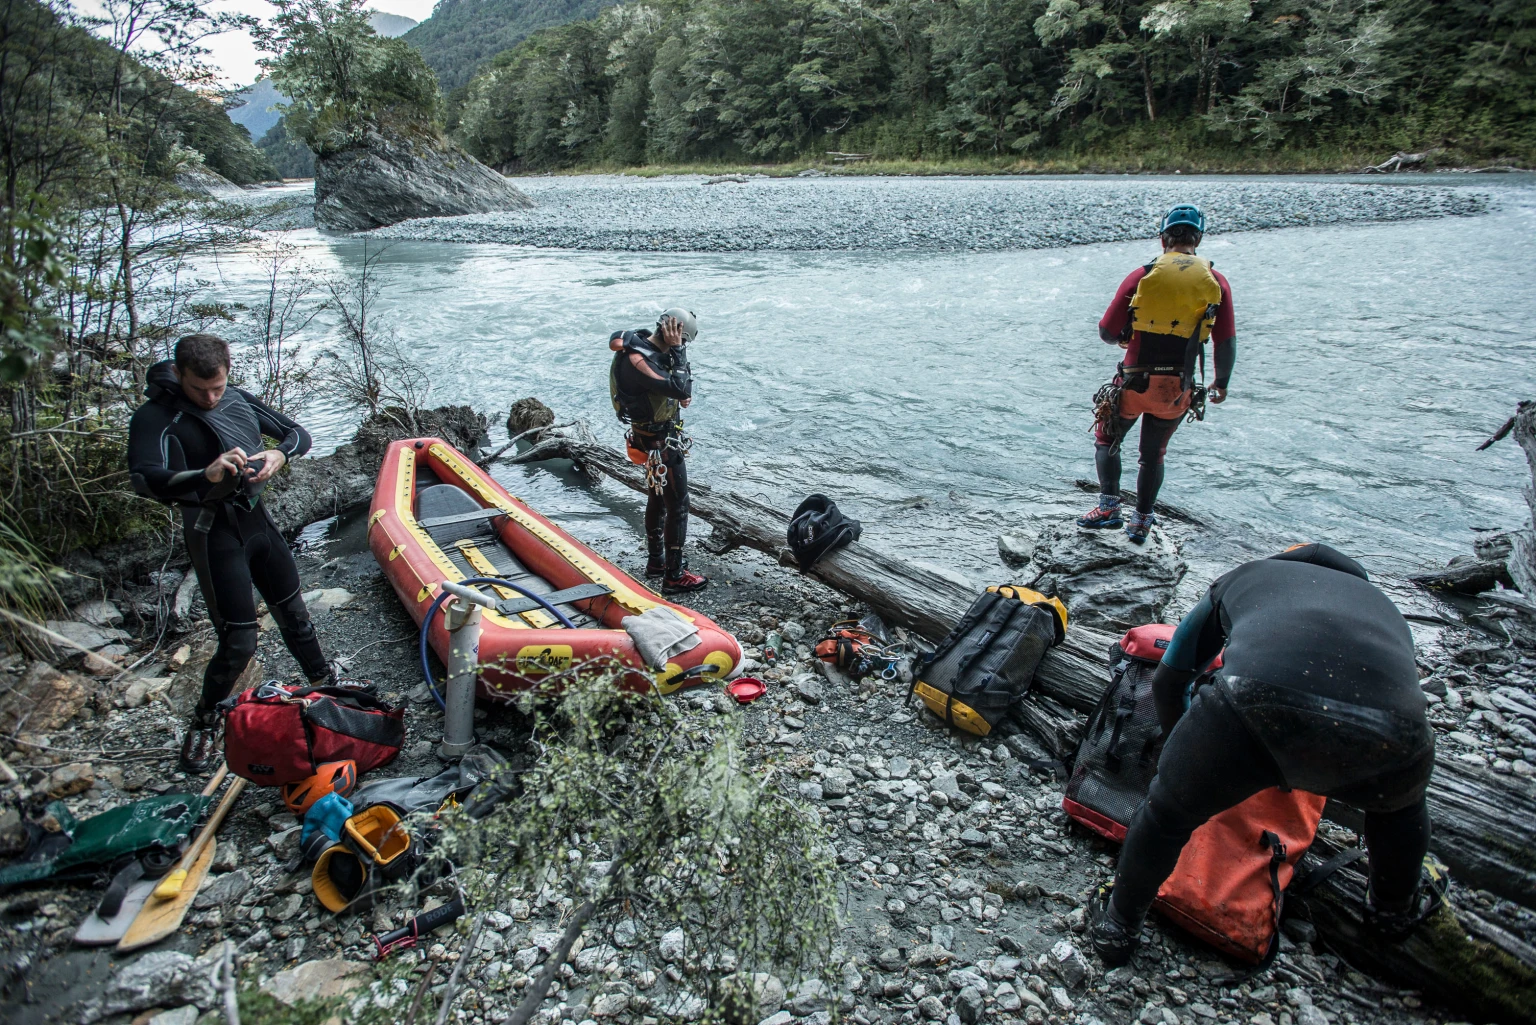 Pack-rafting down the Dart River was not as simple as we had pictured...